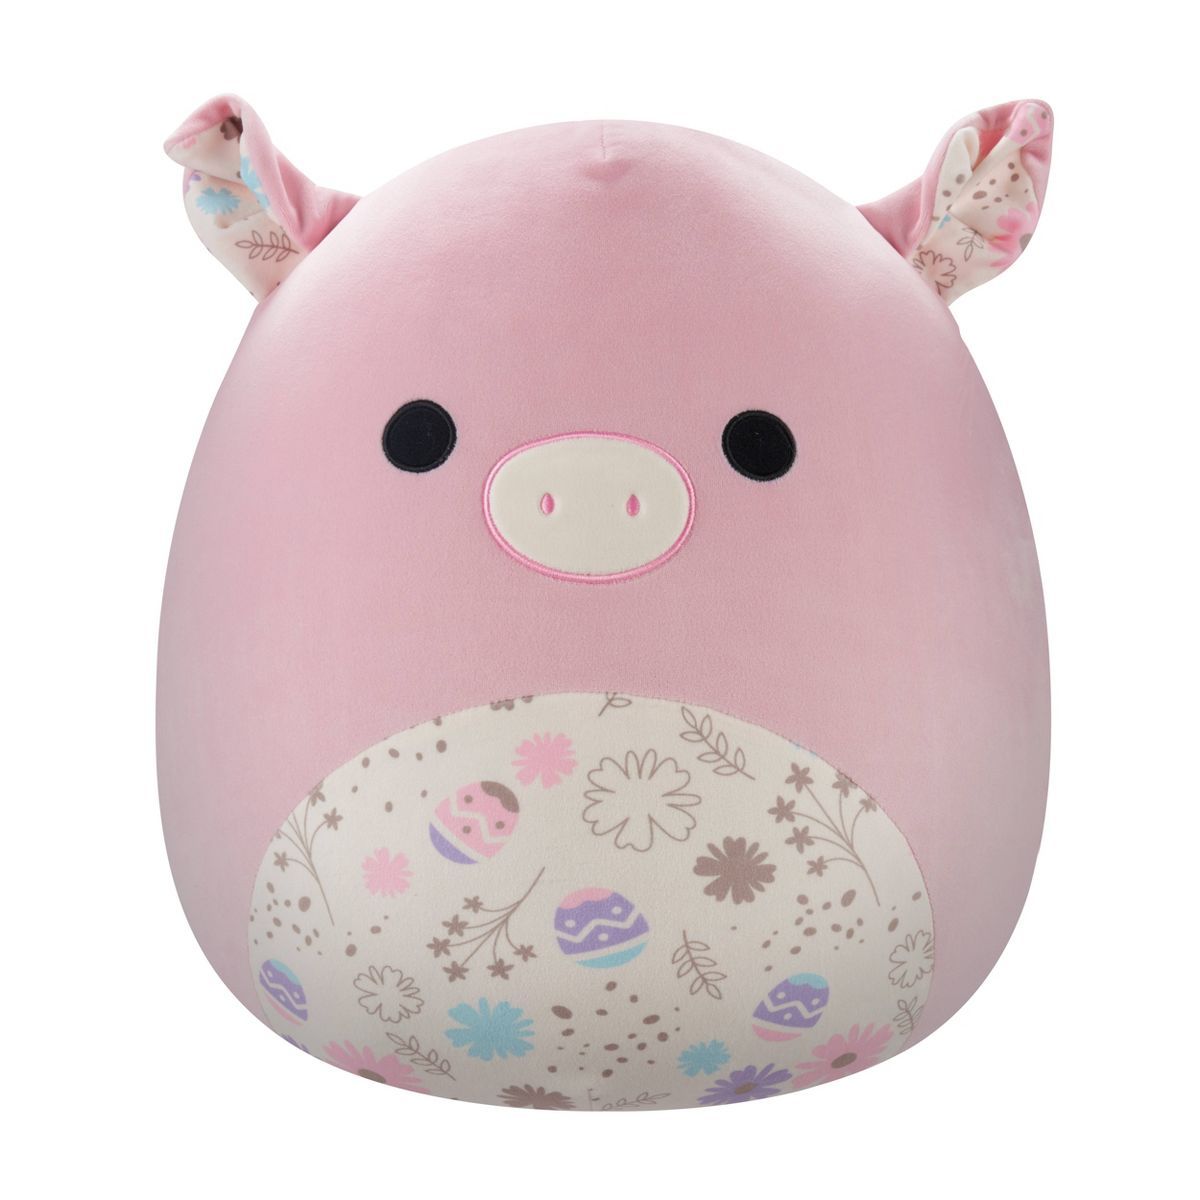 Squishmallows 16" Peter Pink Pig with Easter Print Belly Large Plush | Target